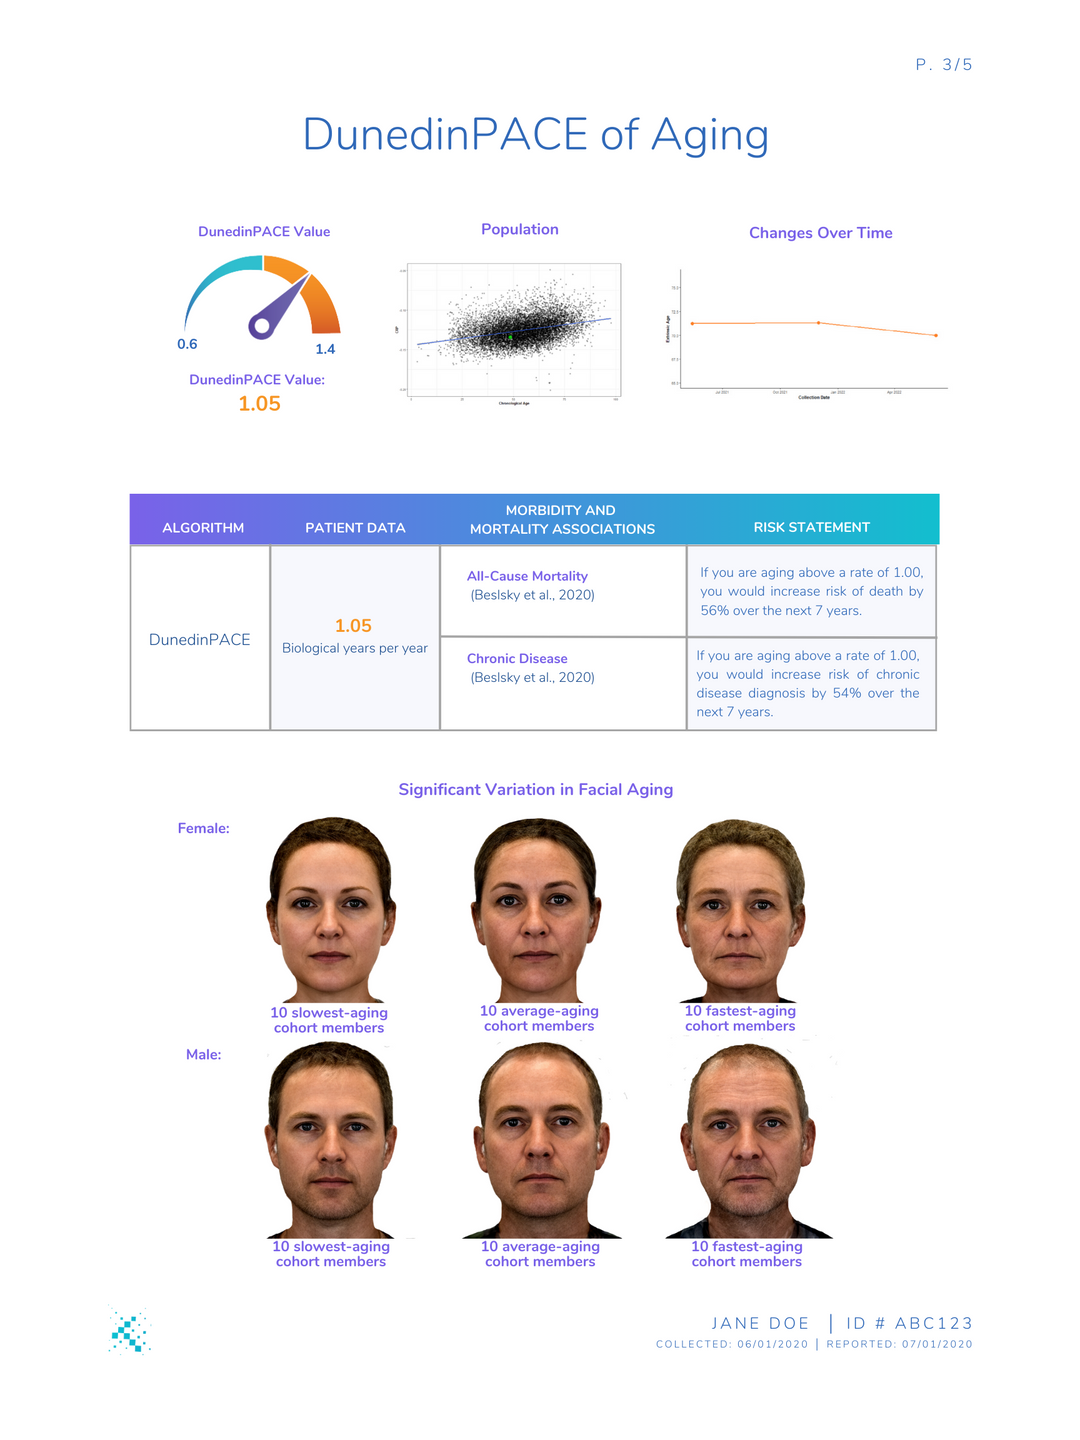 Pace of Aging Report (Using the DunedinPACE Algorithm)